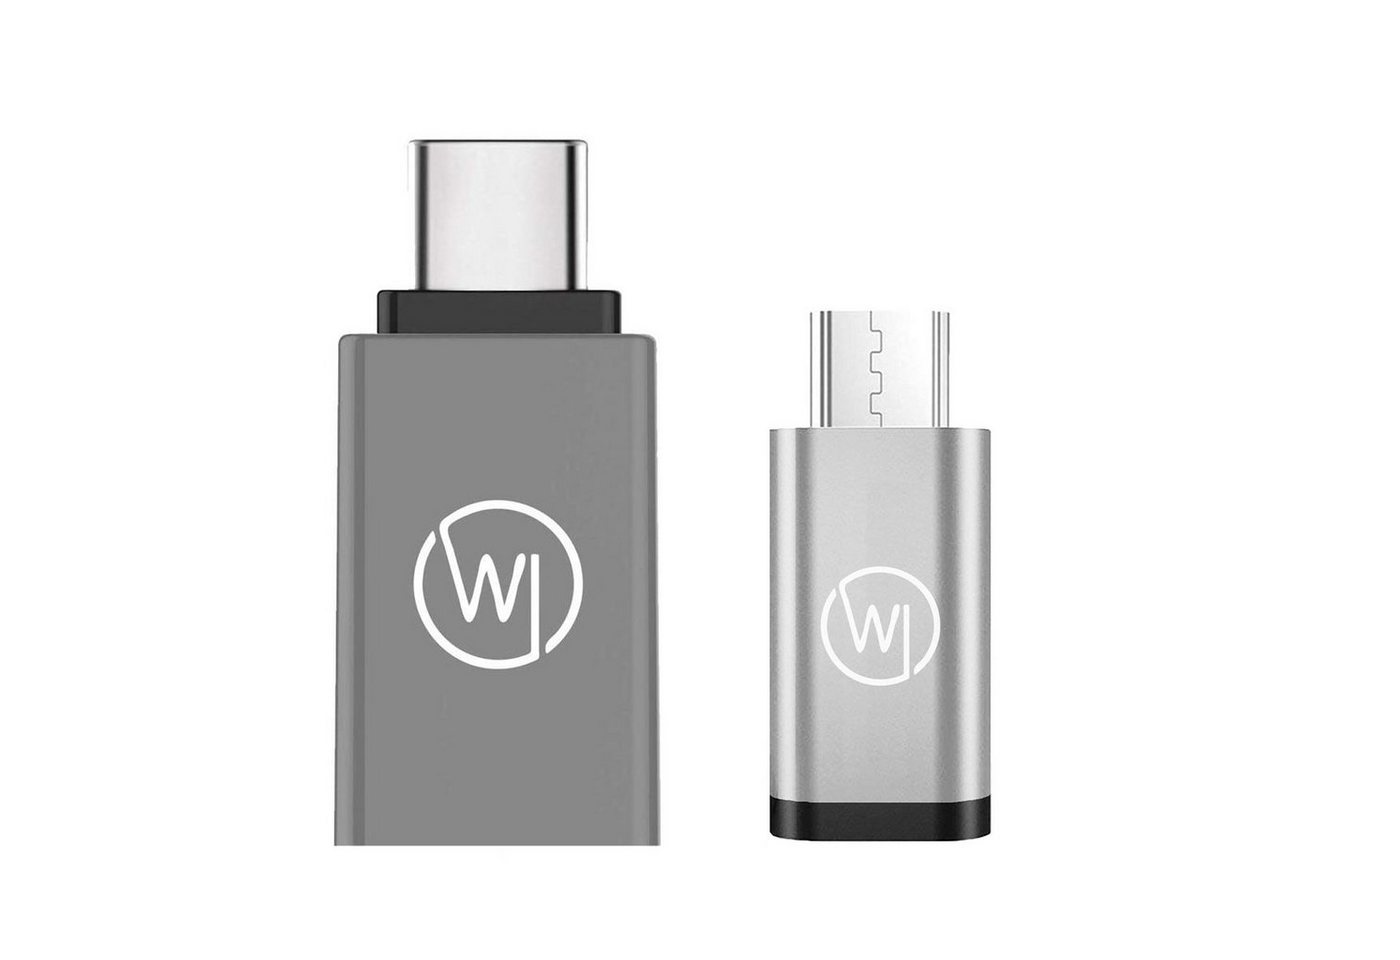 Wicked Chili 2er Set MicroUSB + USB C Superspeed OTG Handy Adapter USB-Adapter MicroUSB, USB-C zu USB-A, USB-C, MicroUSB auf USB C Adapter: Für OTG-fähige Smartphones / Tablets mit m von Wicked Chili